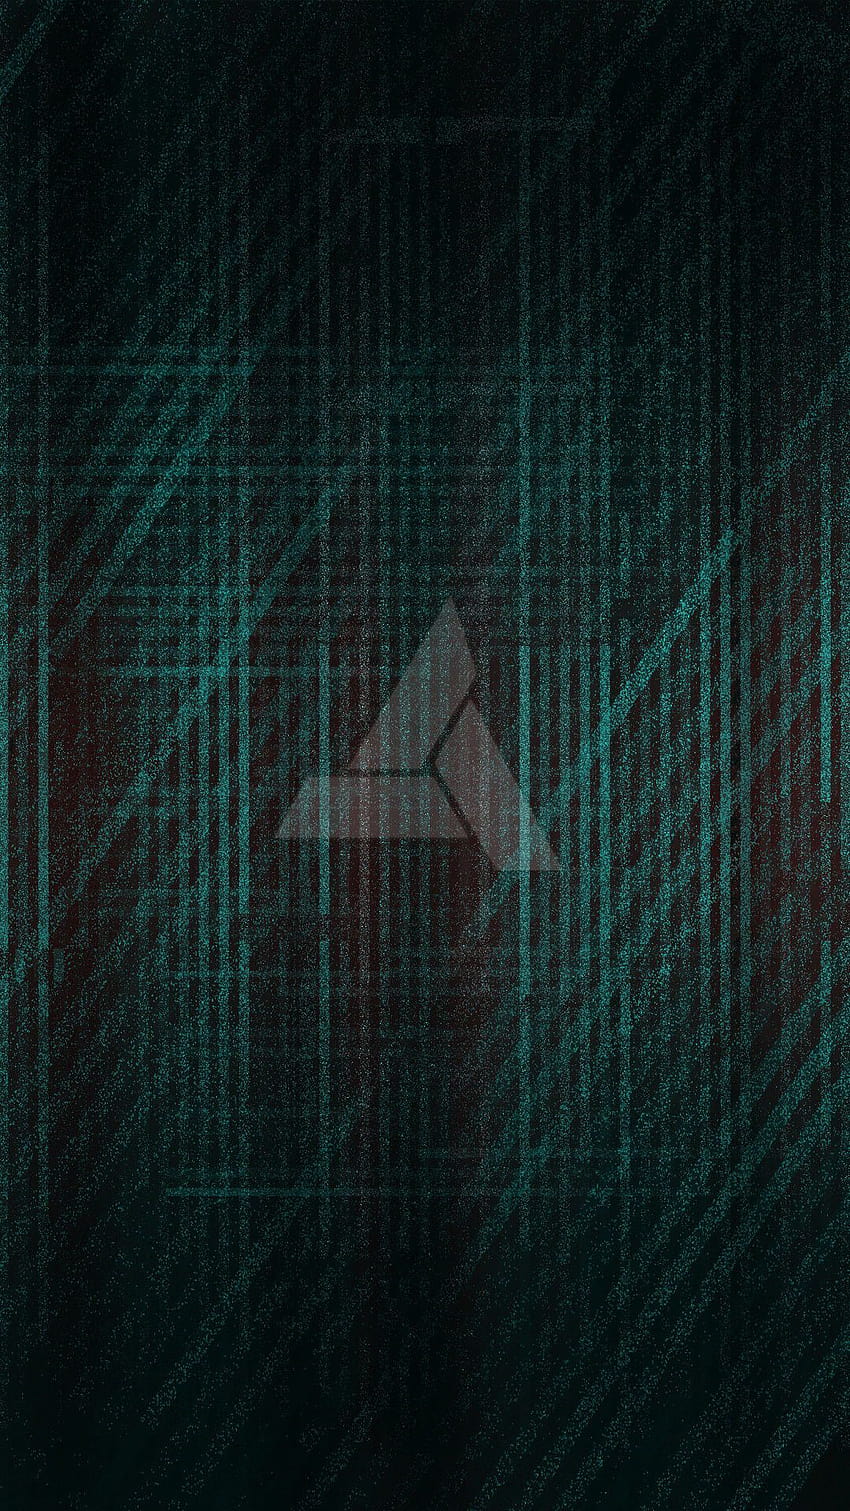 Black/teal Abstergo I just made for my new phone HD phone wallpaper